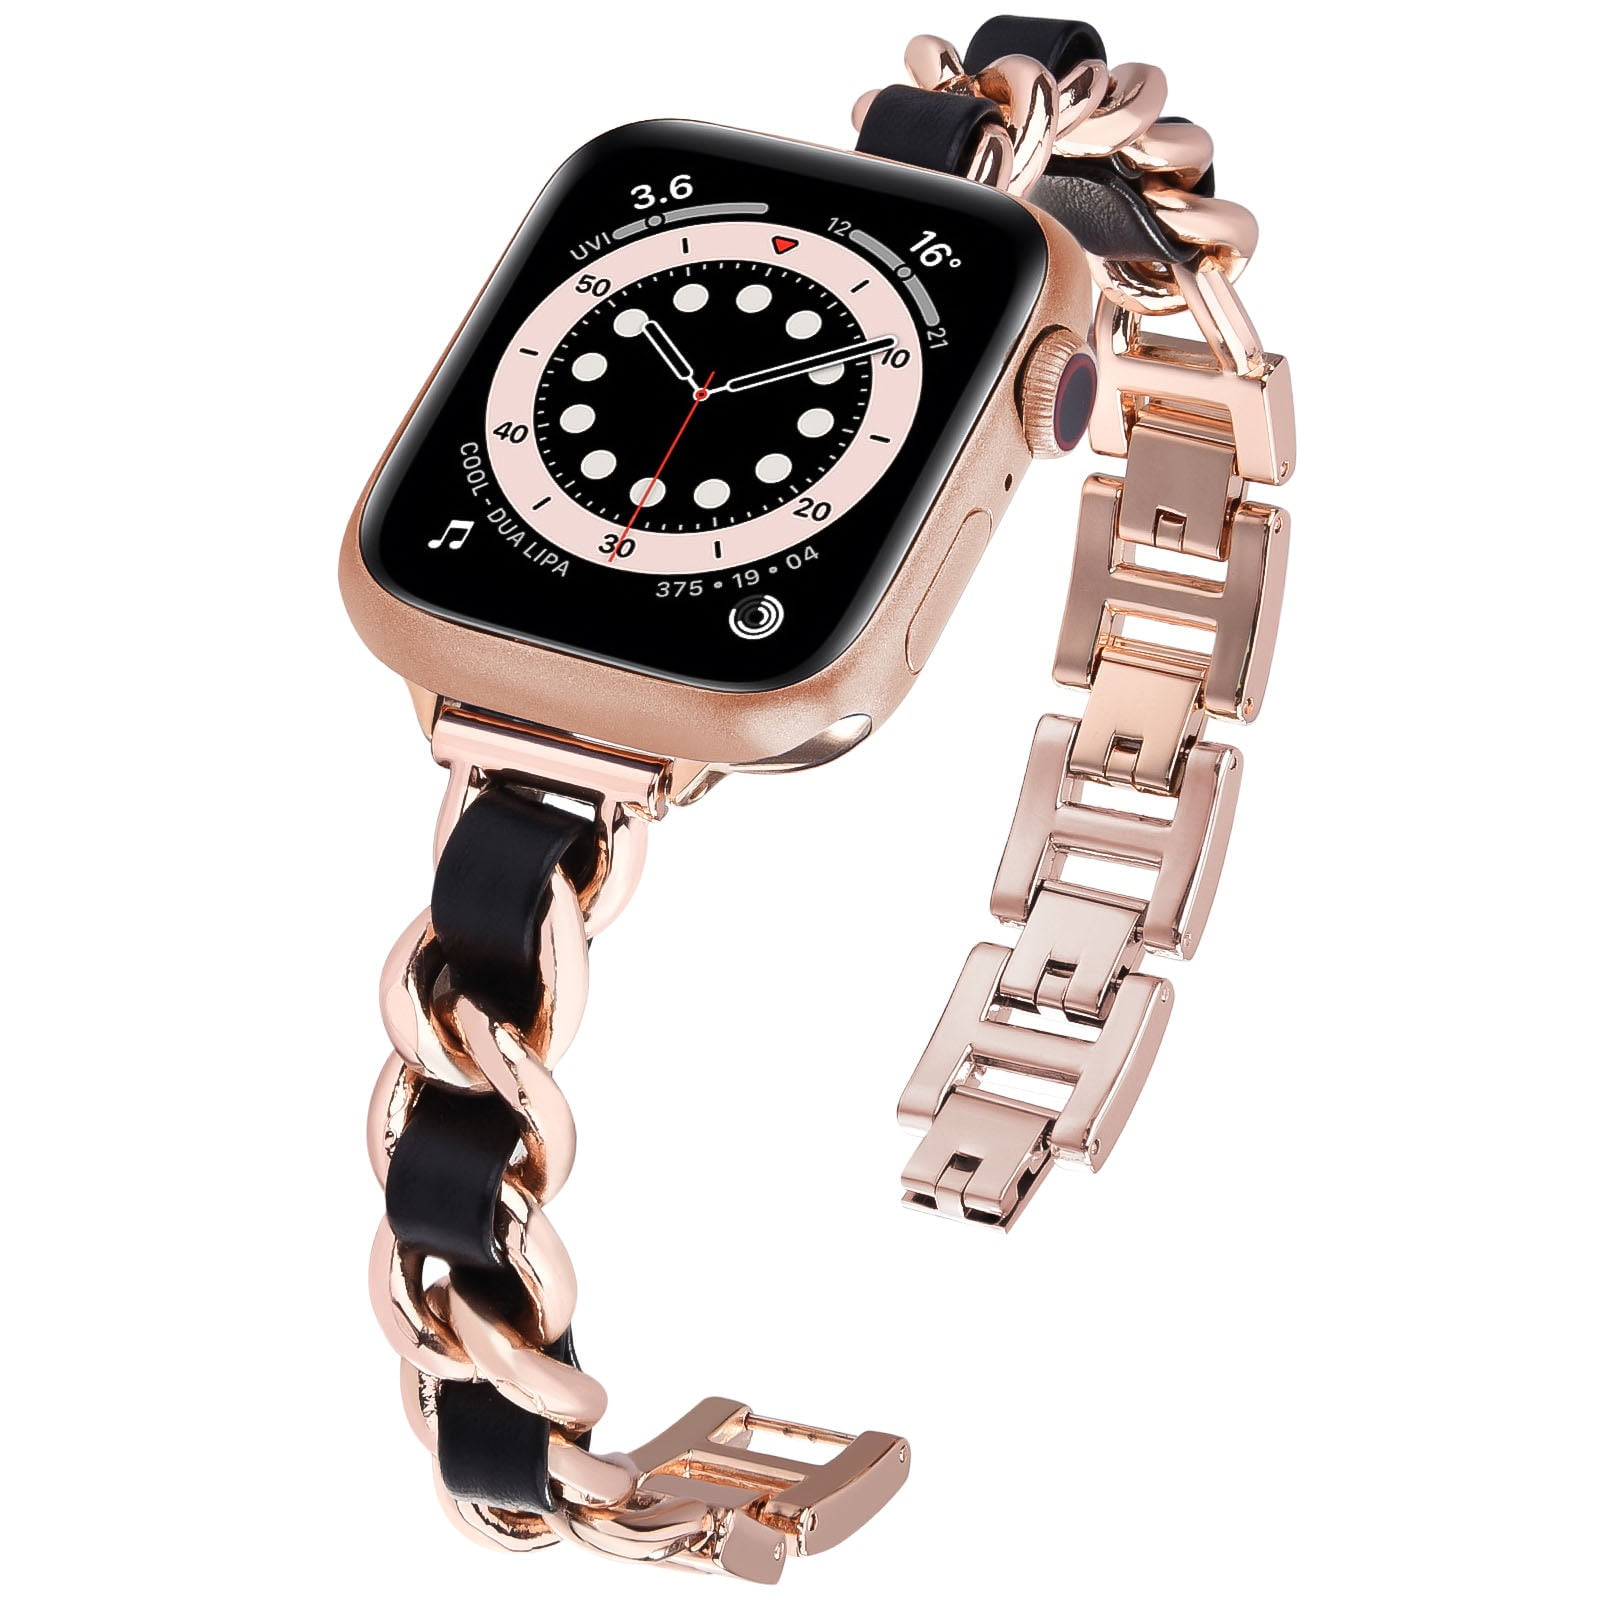 Stainless Steel Bracelet for Apple Watch | North Street Watch Co.